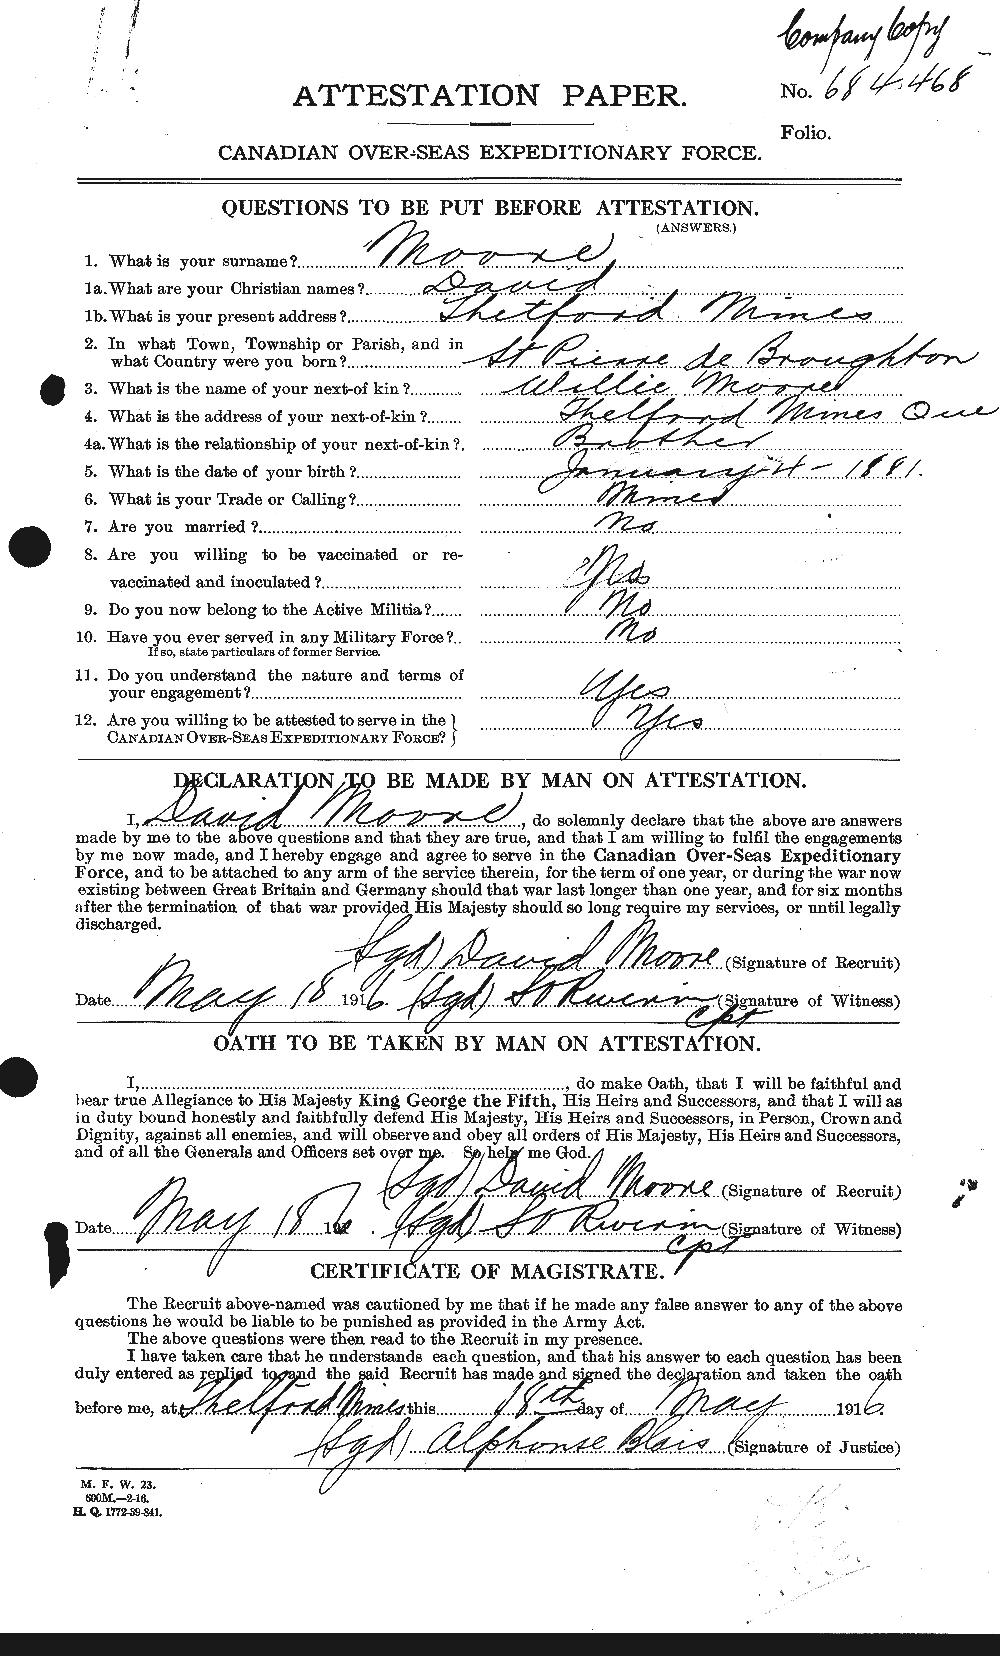 Personnel Records of the First World War - CEF 506566a